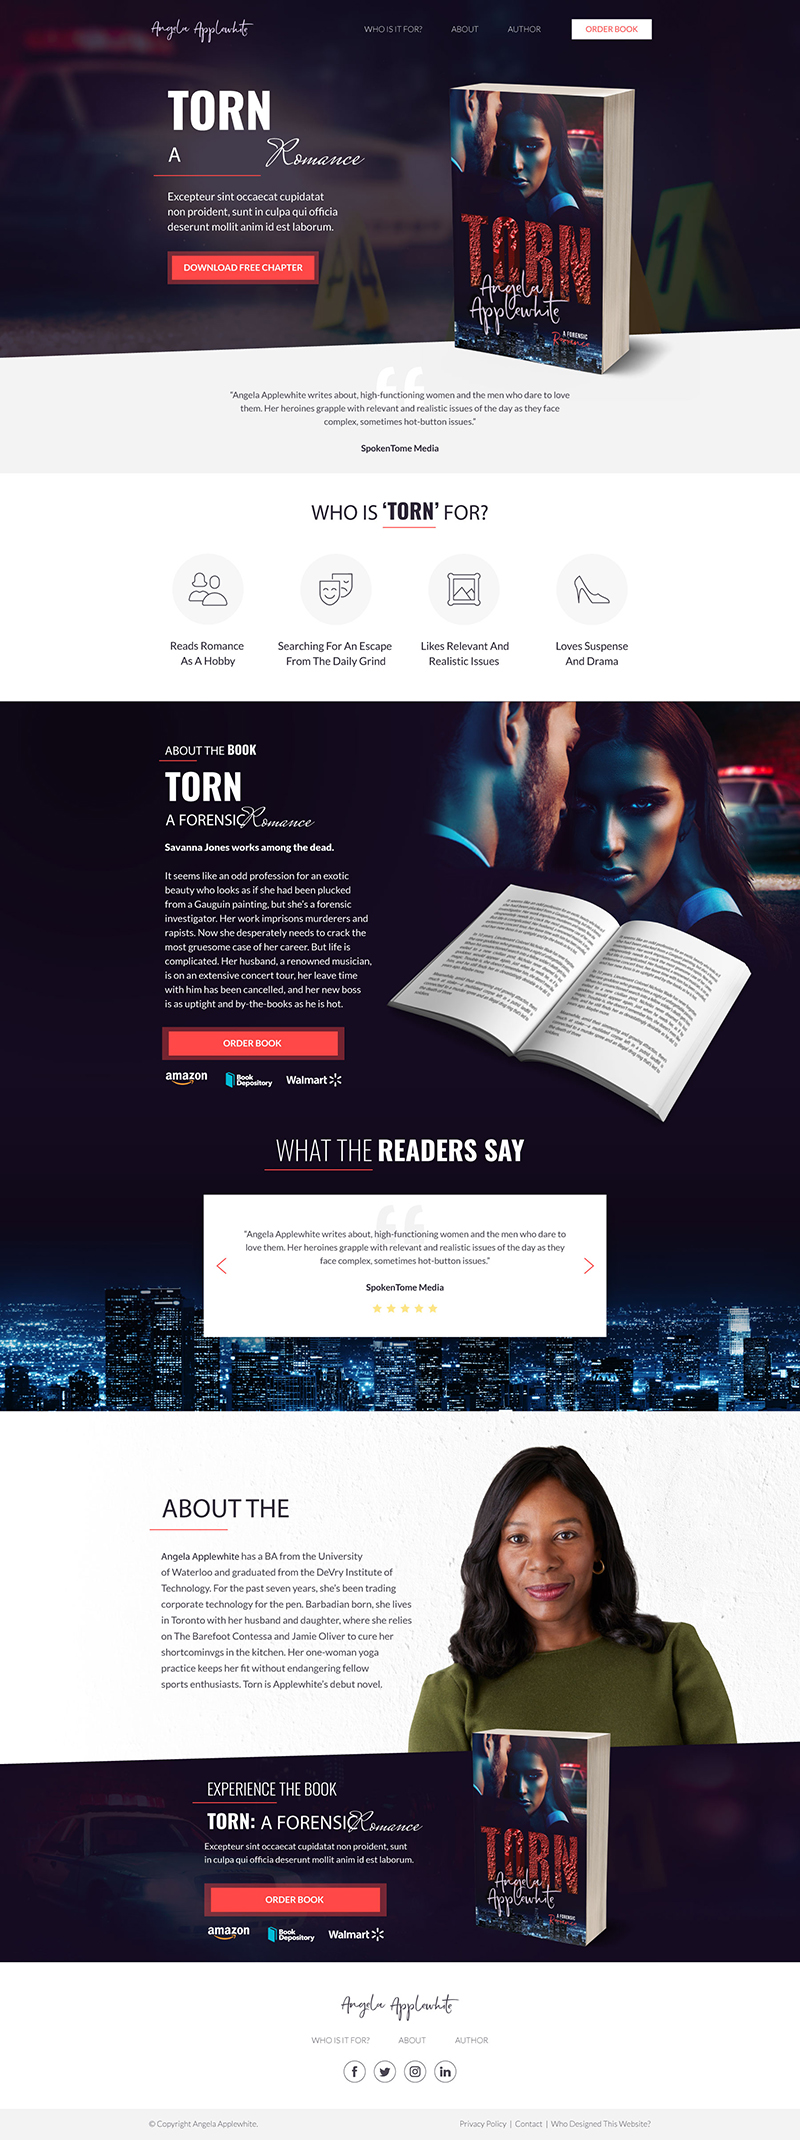 TORN BOOK - LANDING PAGE